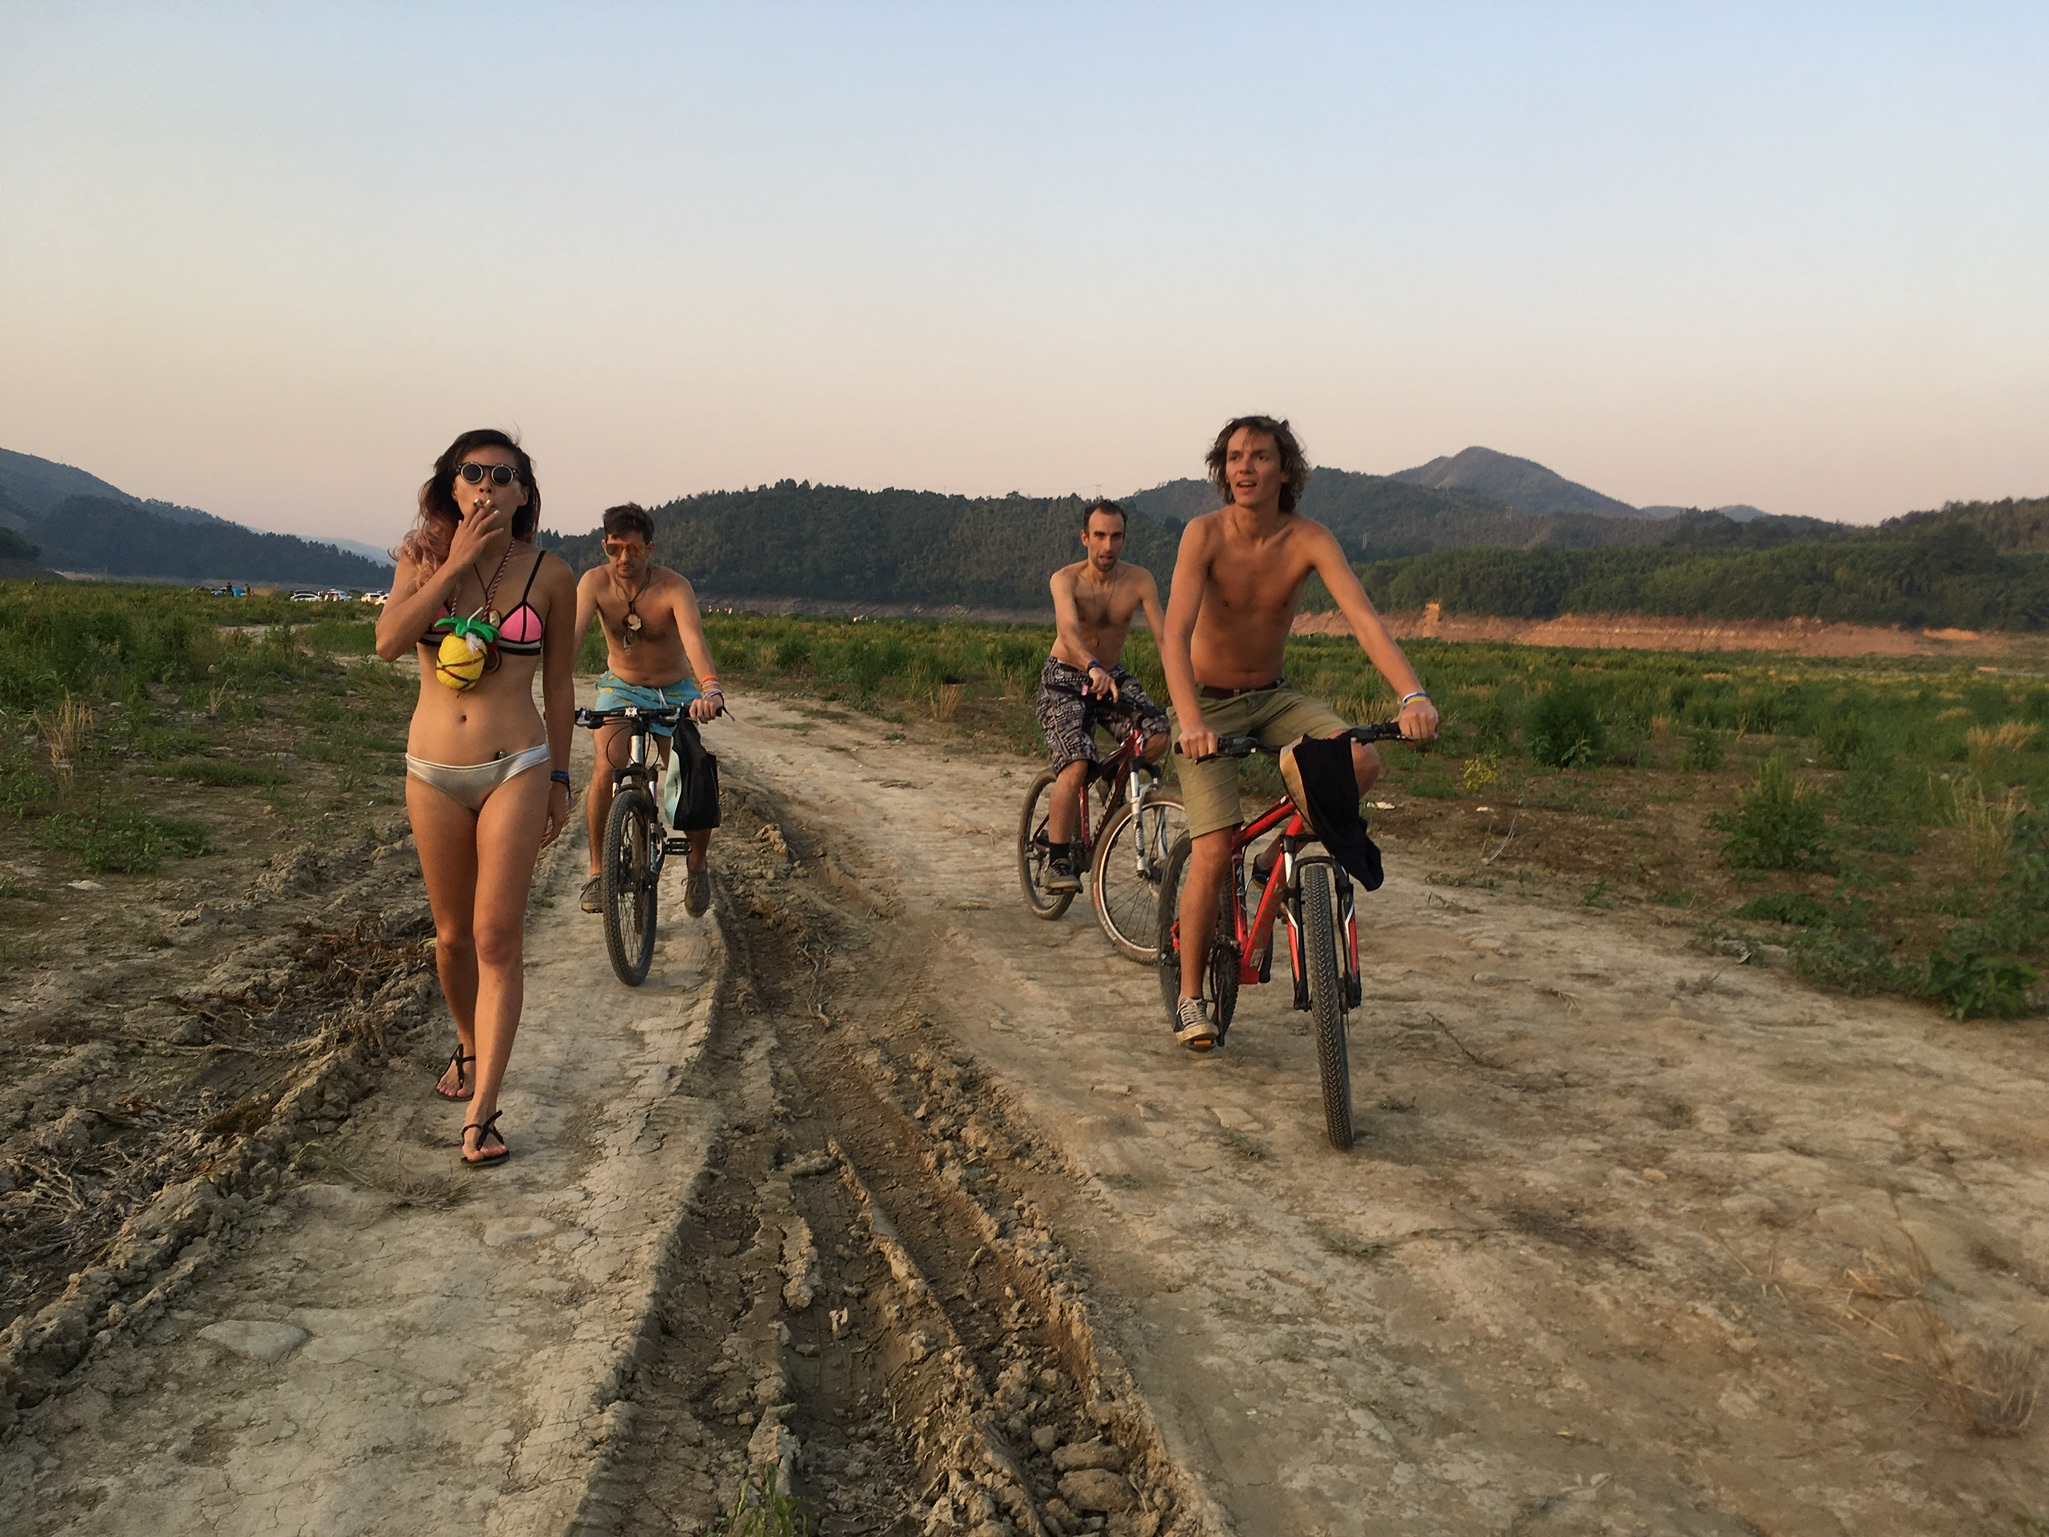 Exploring the "Playa" on bike - Picture by Armands Strauja